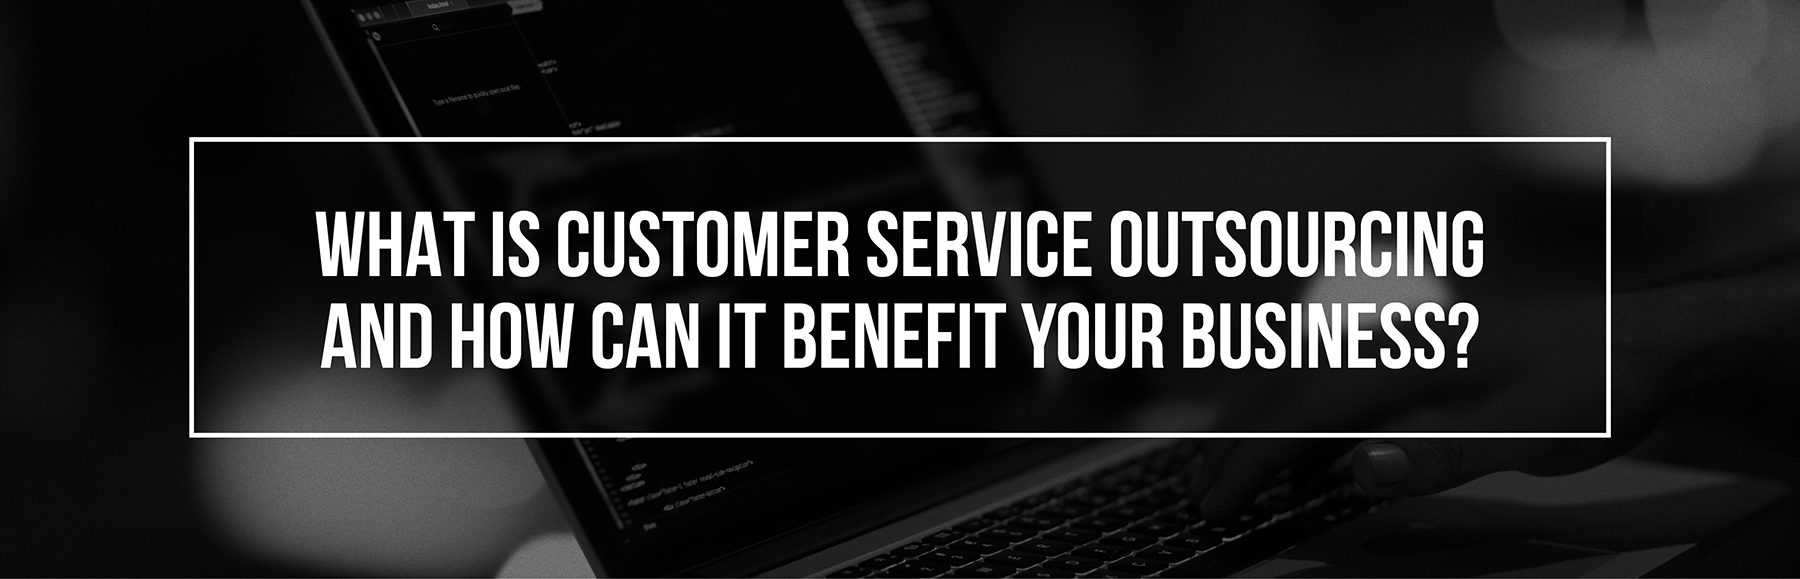 what-is-customer-service-outsourcing